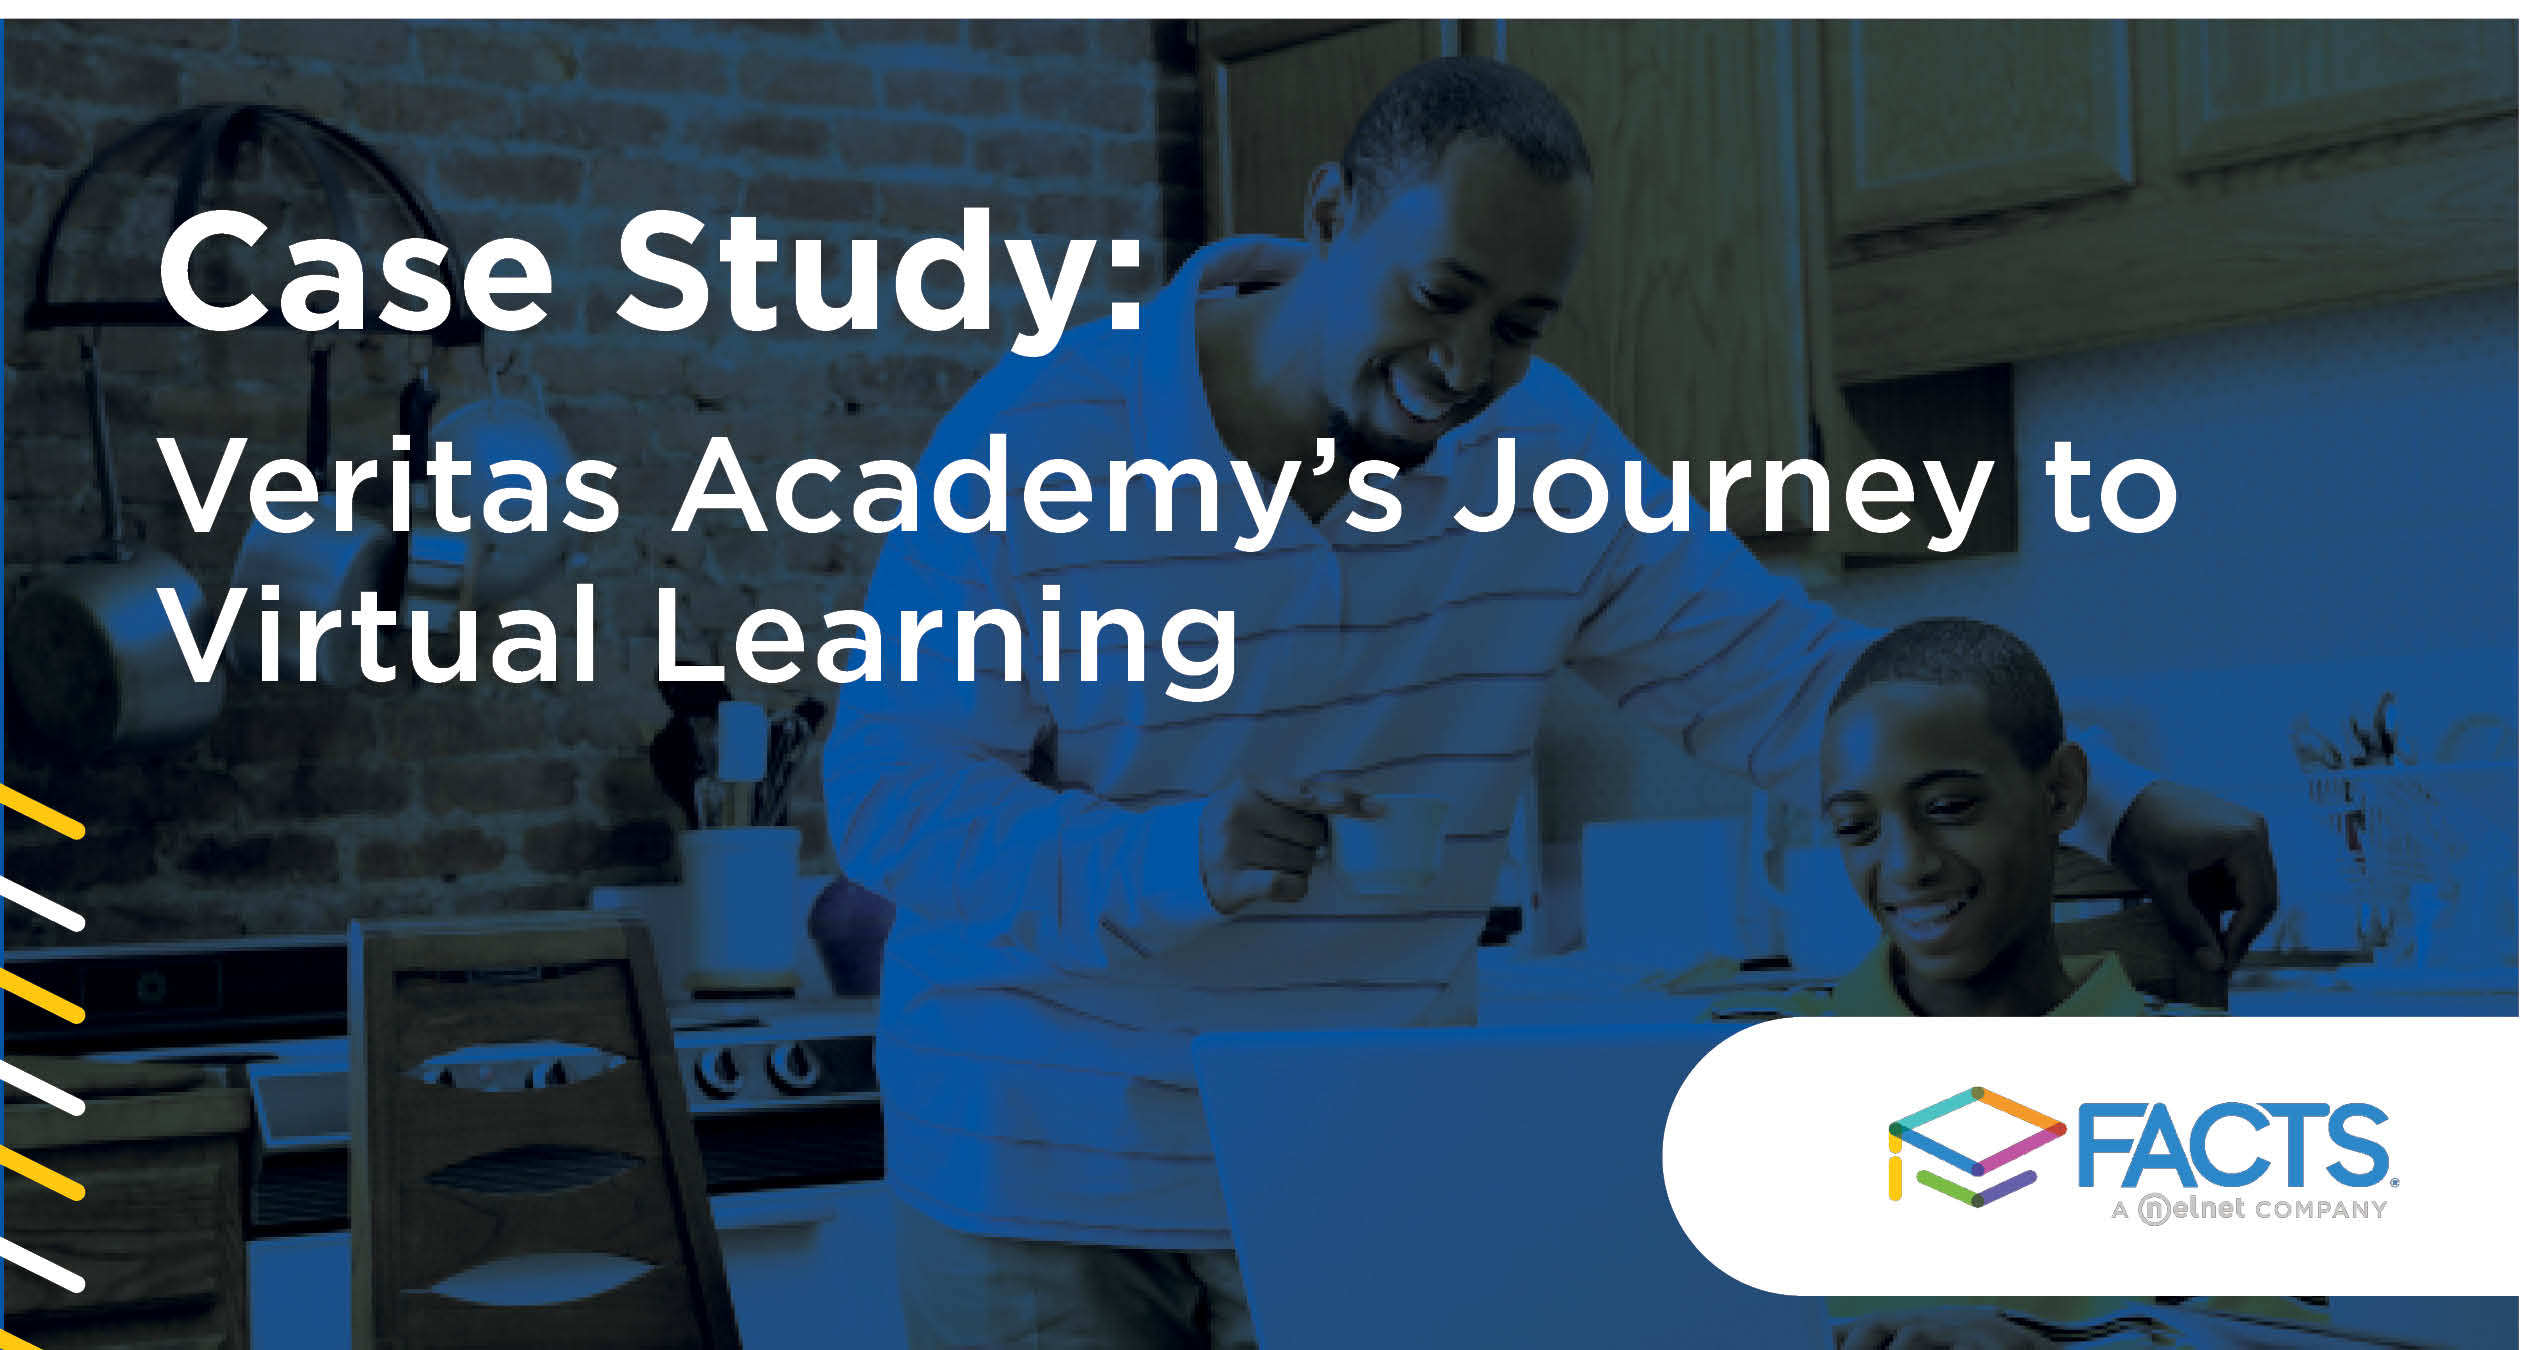 Veritas Academy's Journey to Virtual Learning